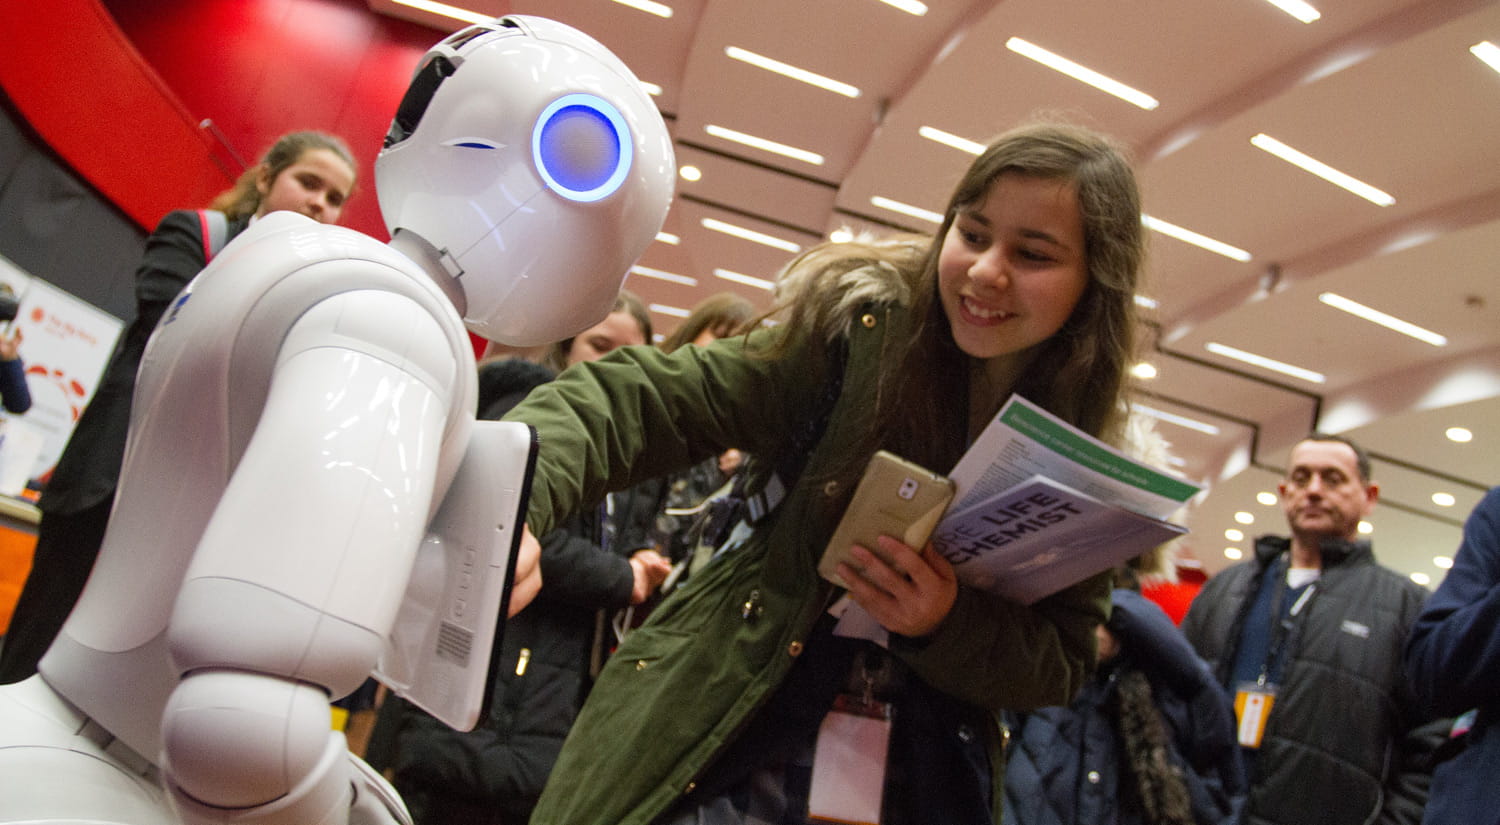 He can dance, he can play, and he can certainly entertain hundreds of Big Bang visitors – it’s Pepper the robot! 